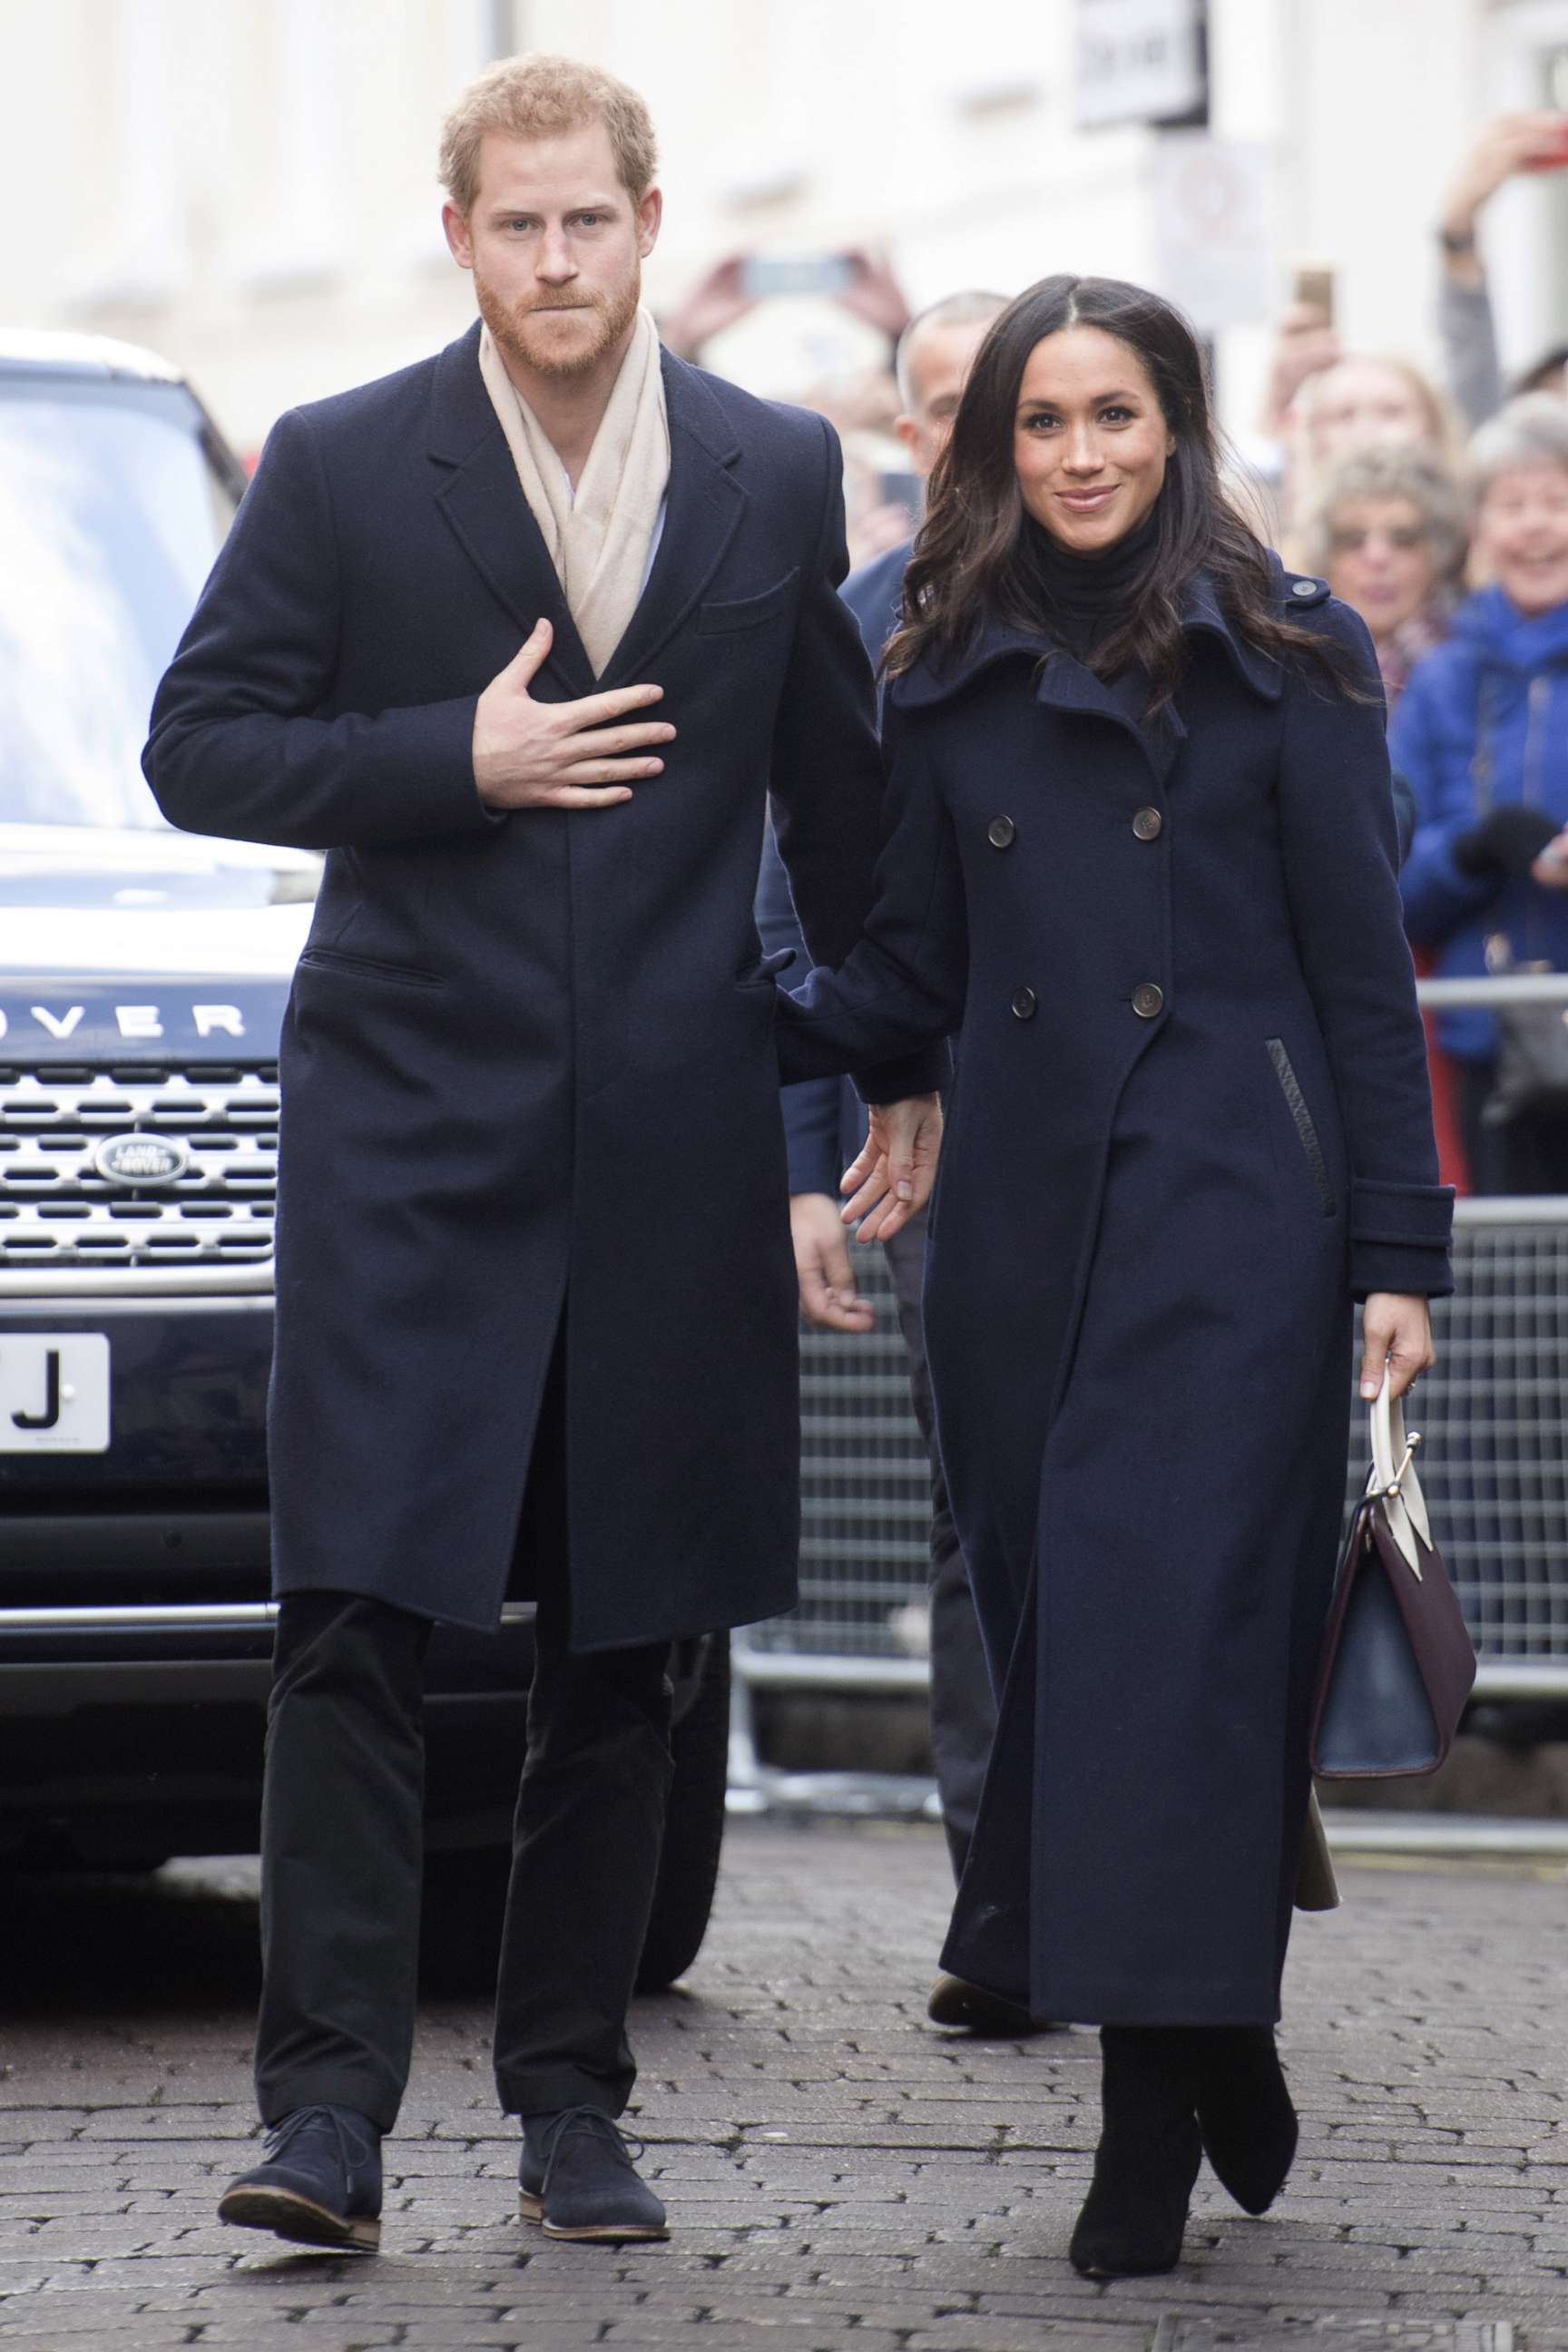 PHOTO: Prince Harry and his fiancee, Meghan Markle, visit Nottingham for their first official public engagement together, Dec. 1, 2017, in Nottingham, England.  